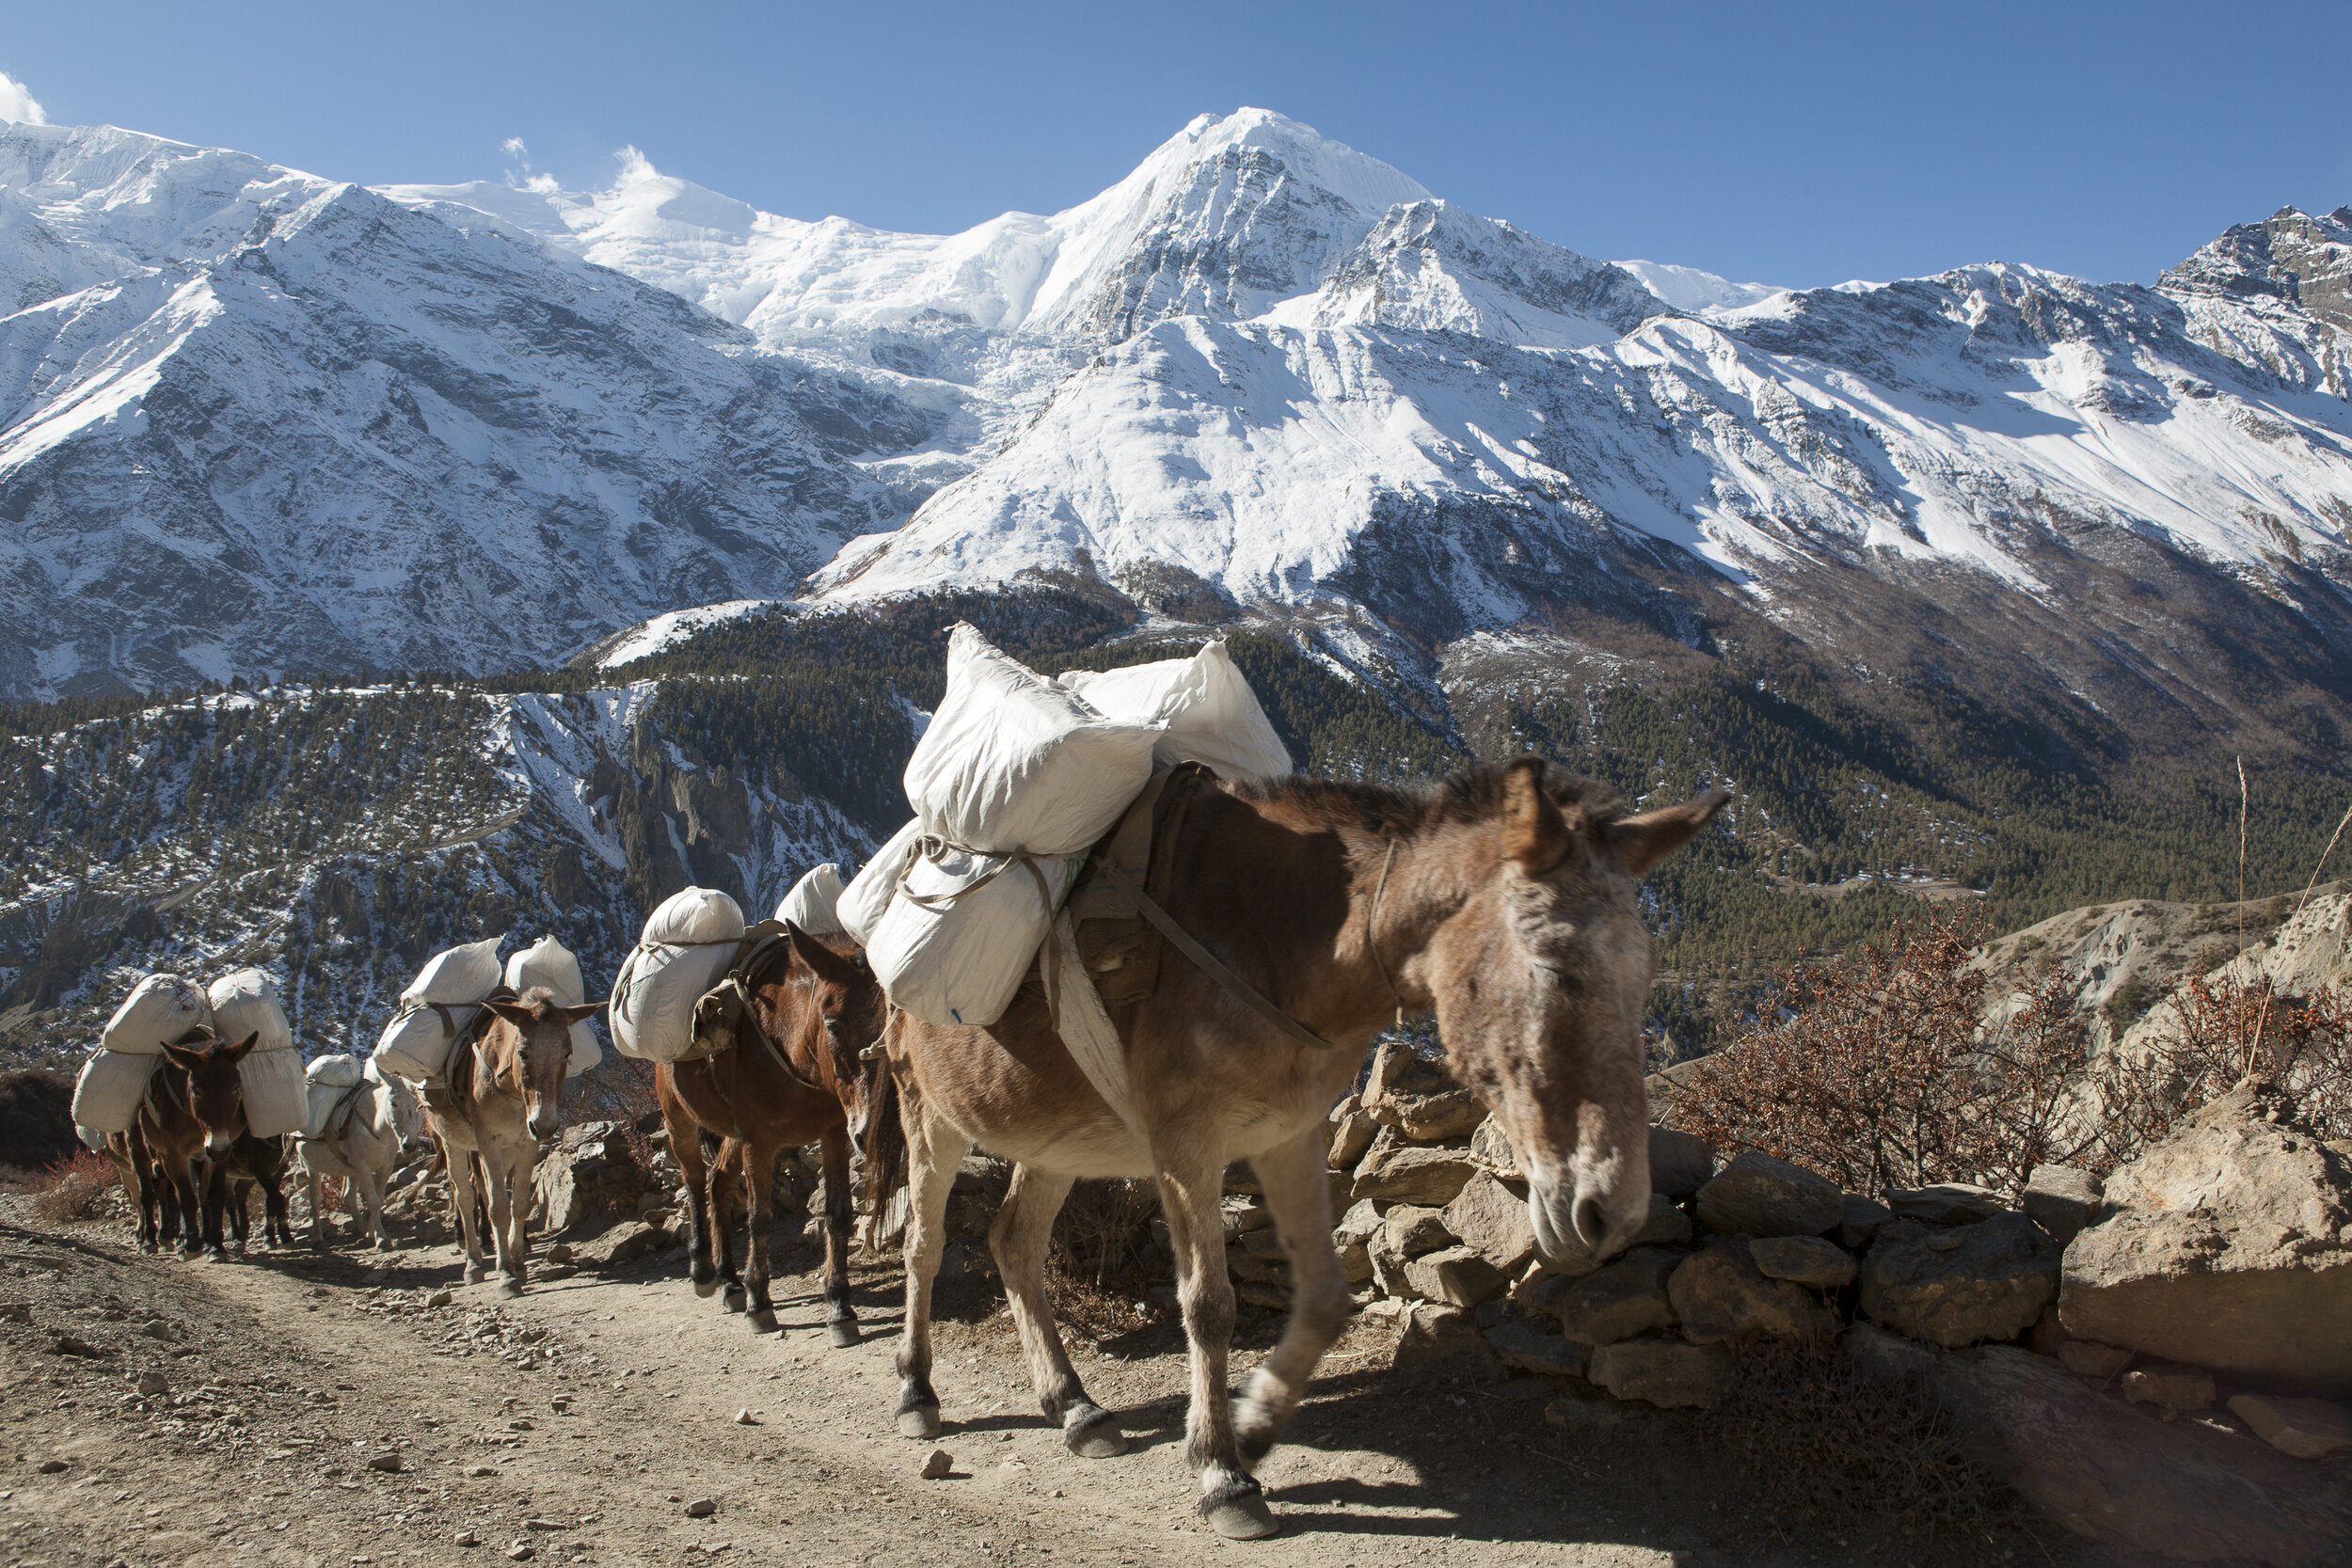  Donkeys carry loads up into the mountains.  